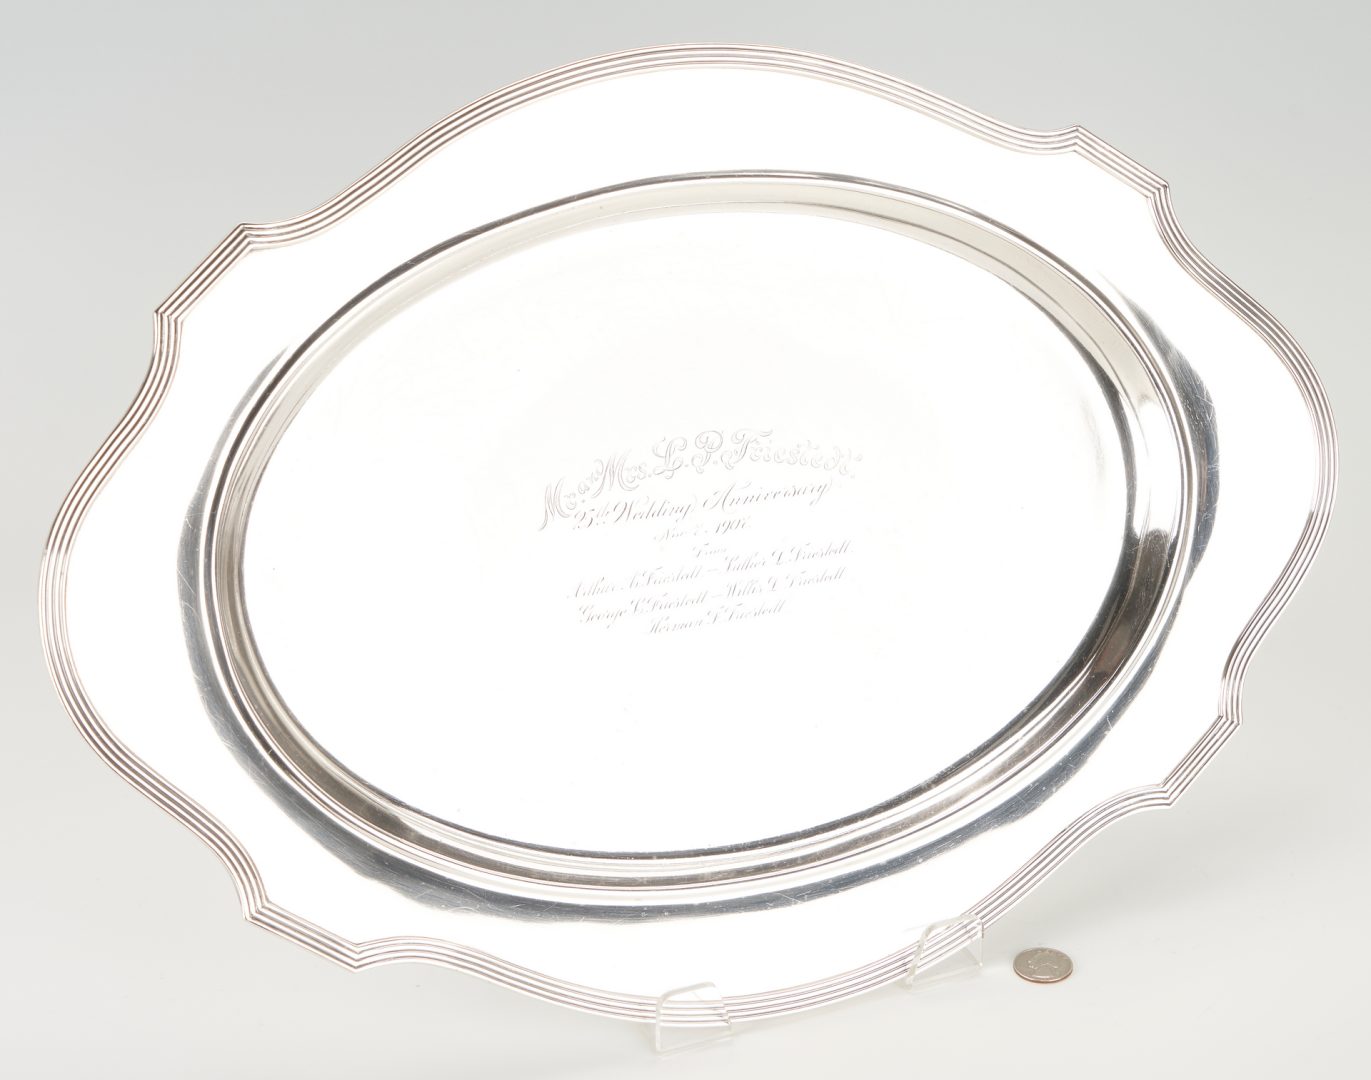 Lot 434: Large Gorham Sterling Silver Oval Tray, 65 oz, inscribed